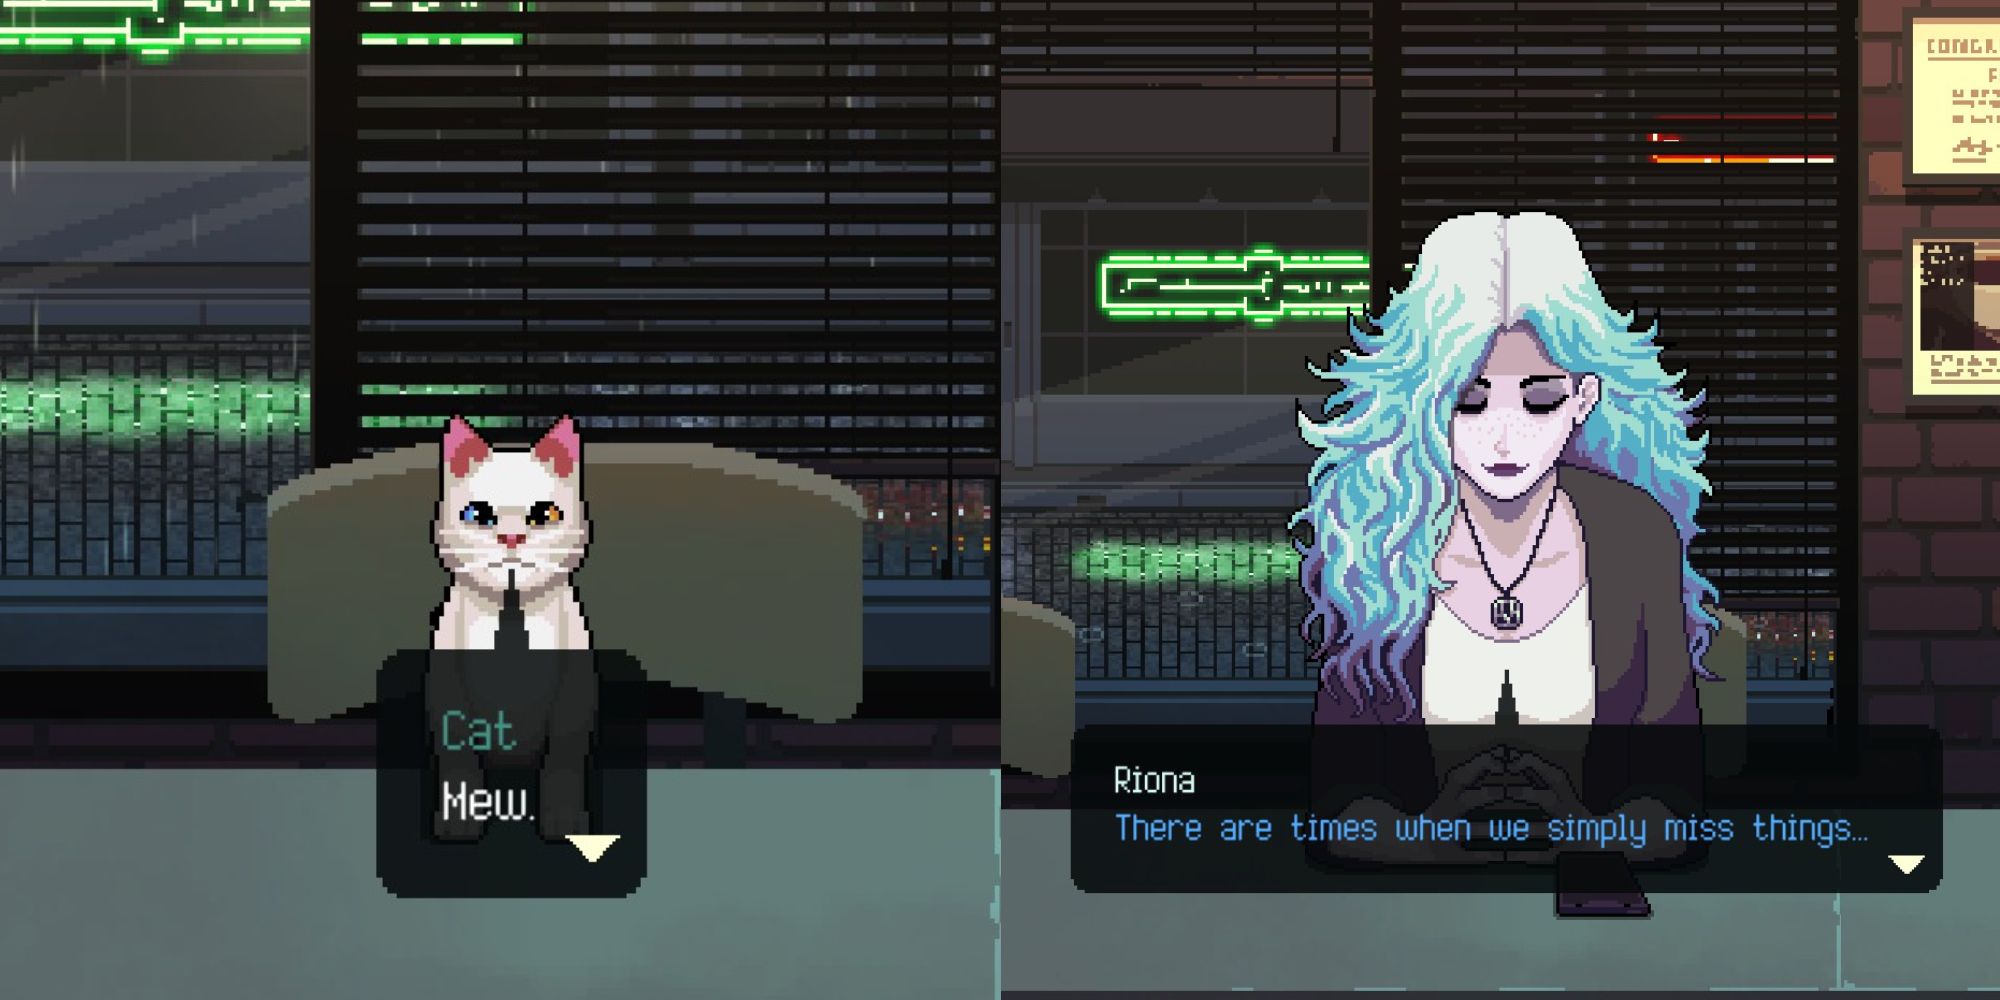 coffee talk 2 white cat meowing and riona in end screen with blue dialogue